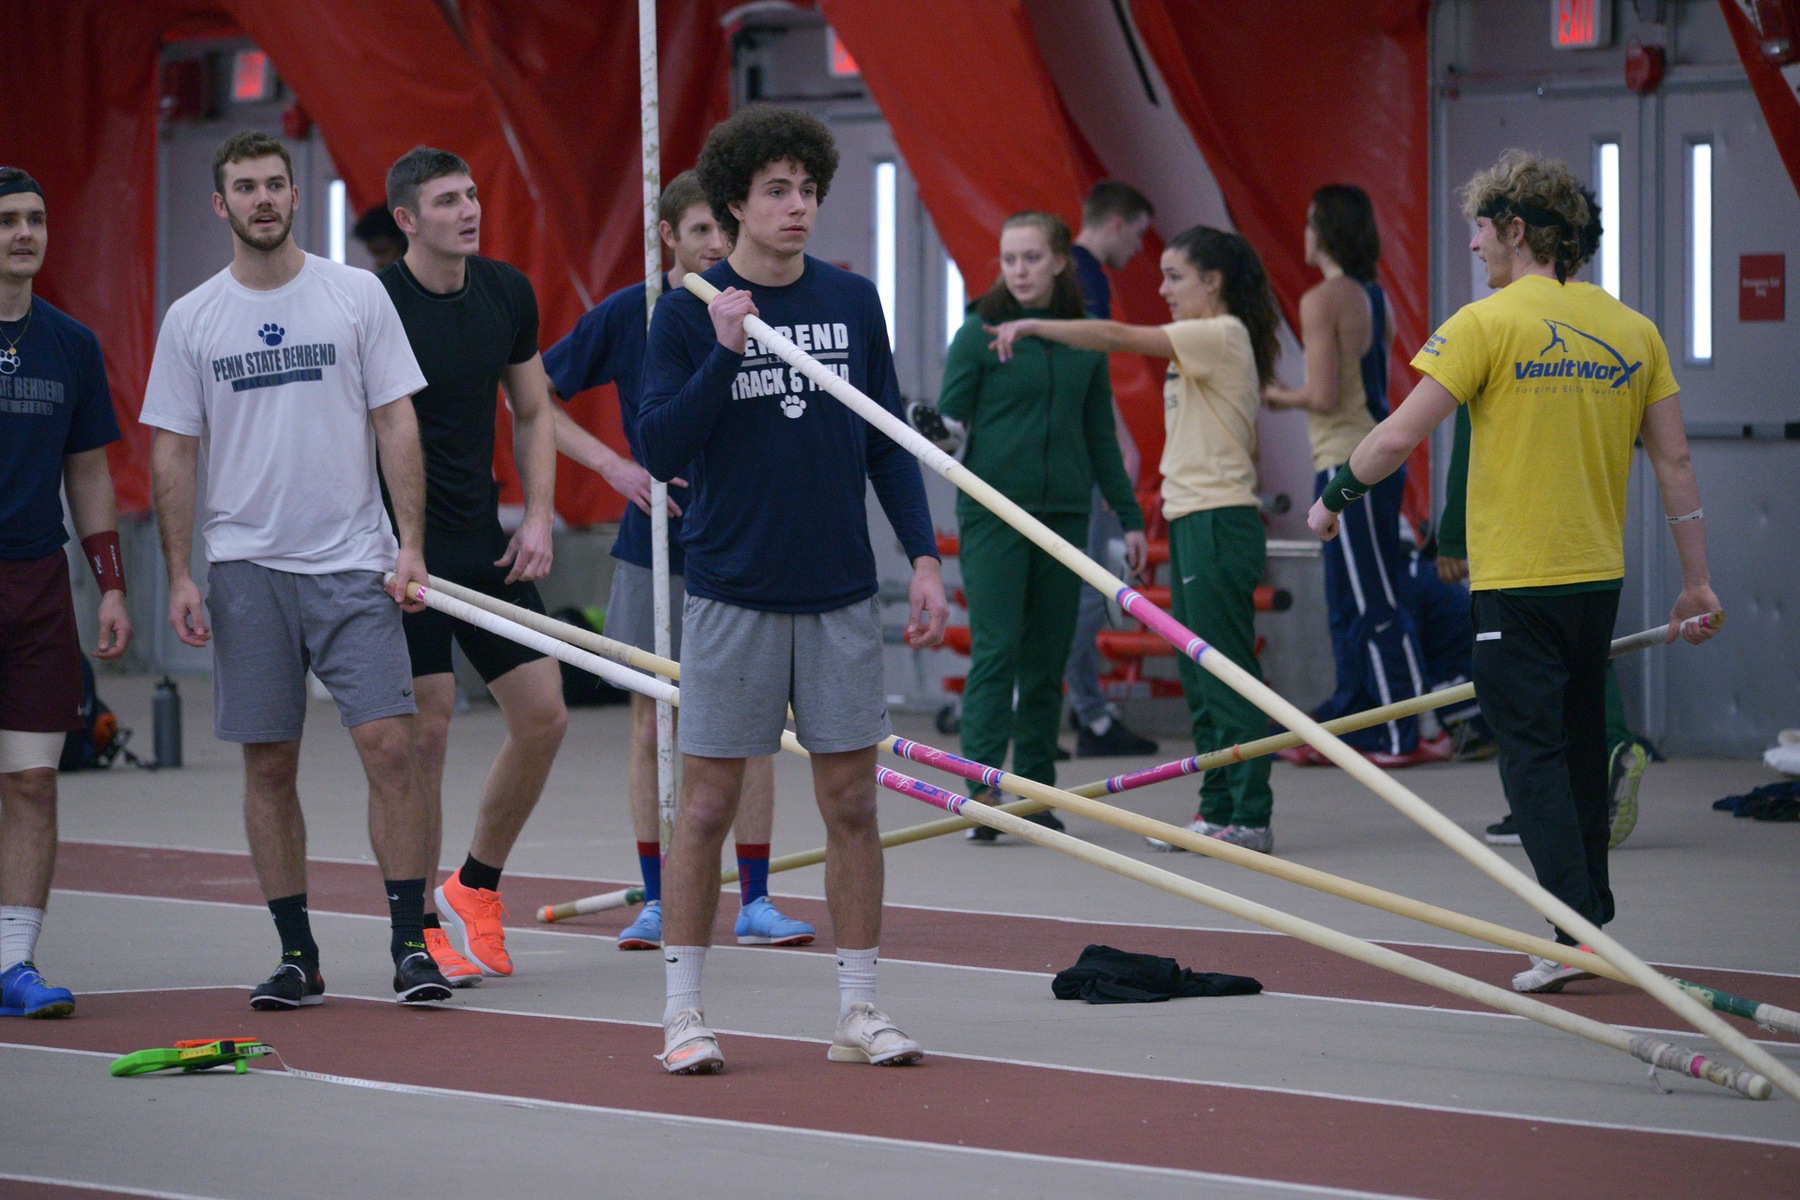 Men's Track and Field Pole Vault Team Ranked First in NCAA Division III